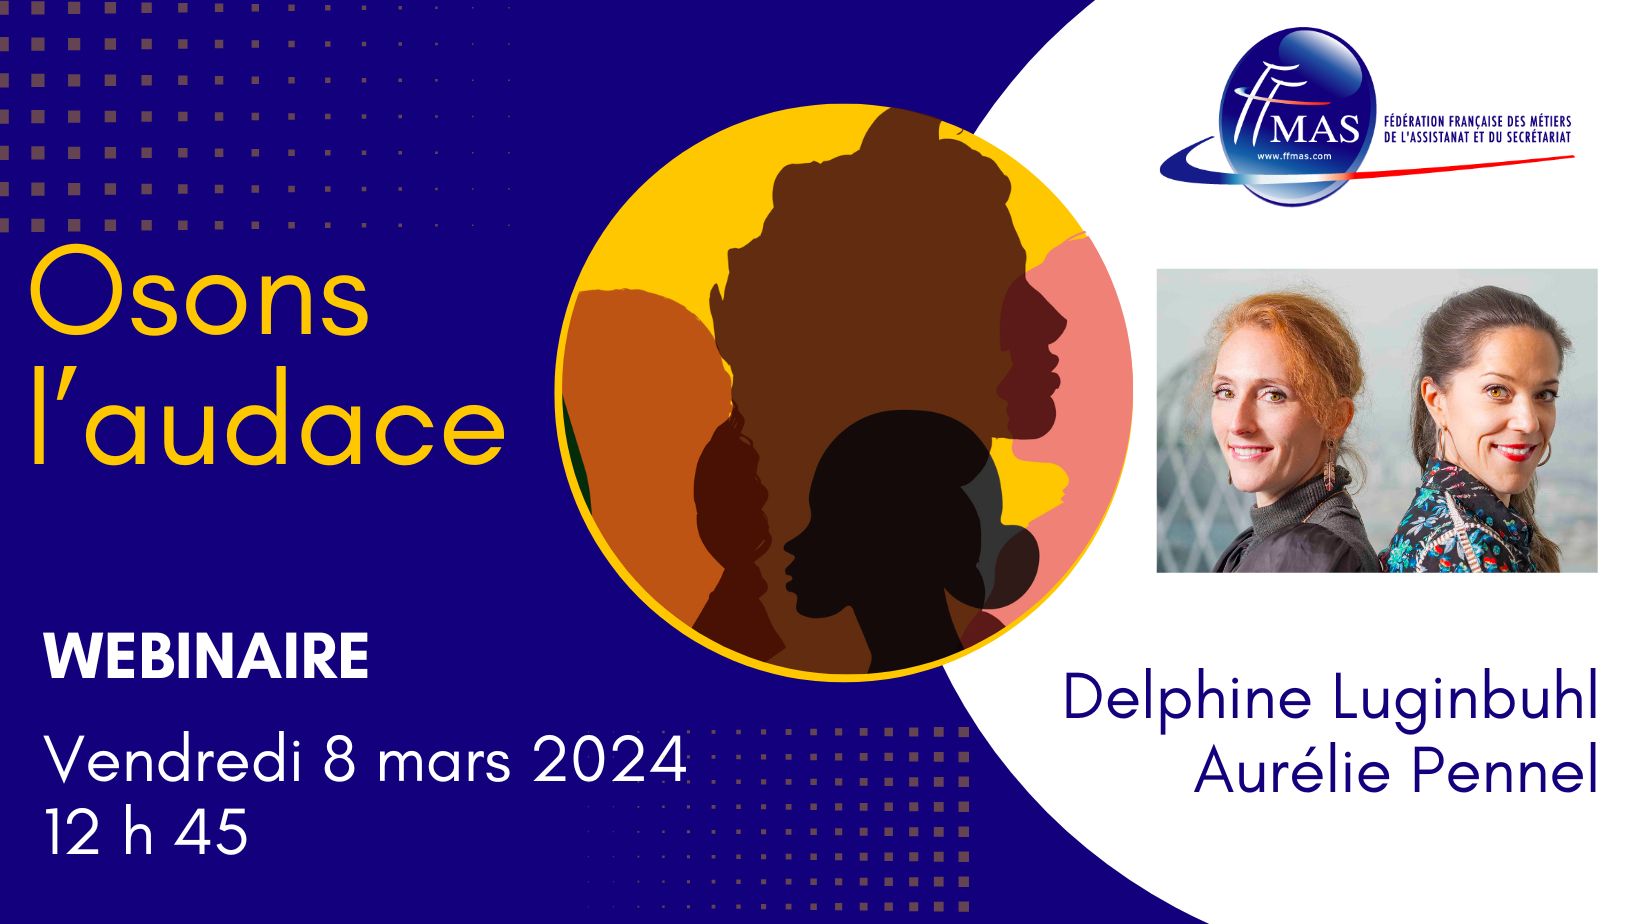 You are currently viewing Webinaire du 8 mars 2024 « Osons l’audace »